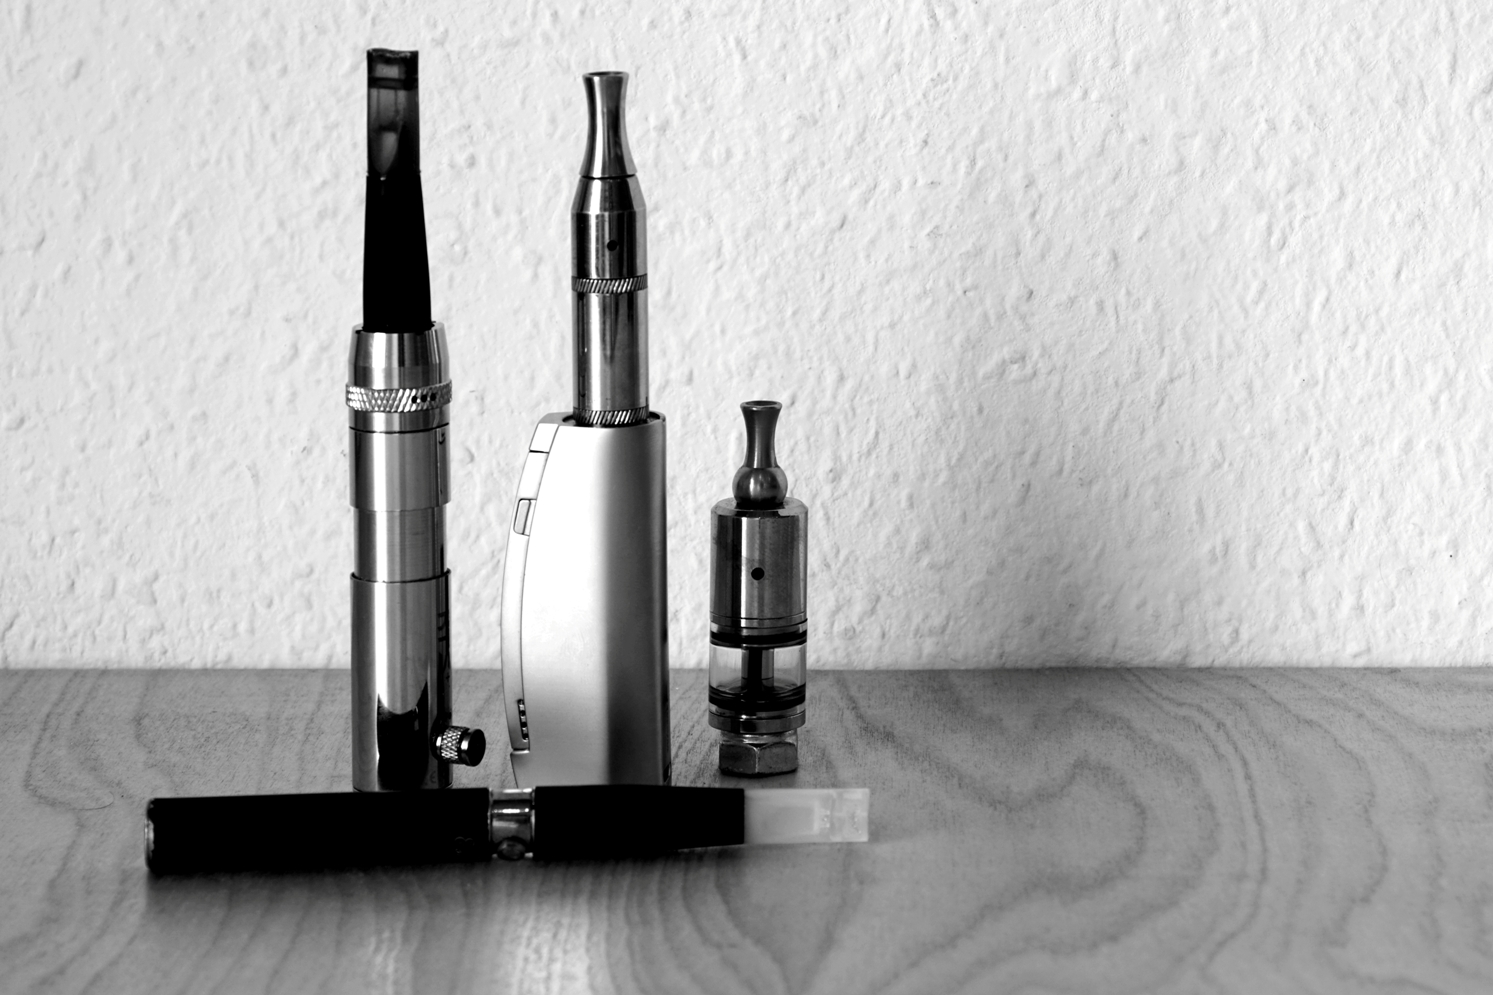 More School Districts Sue E-Cigarette Manufacturer for “Vaping Epidemic”